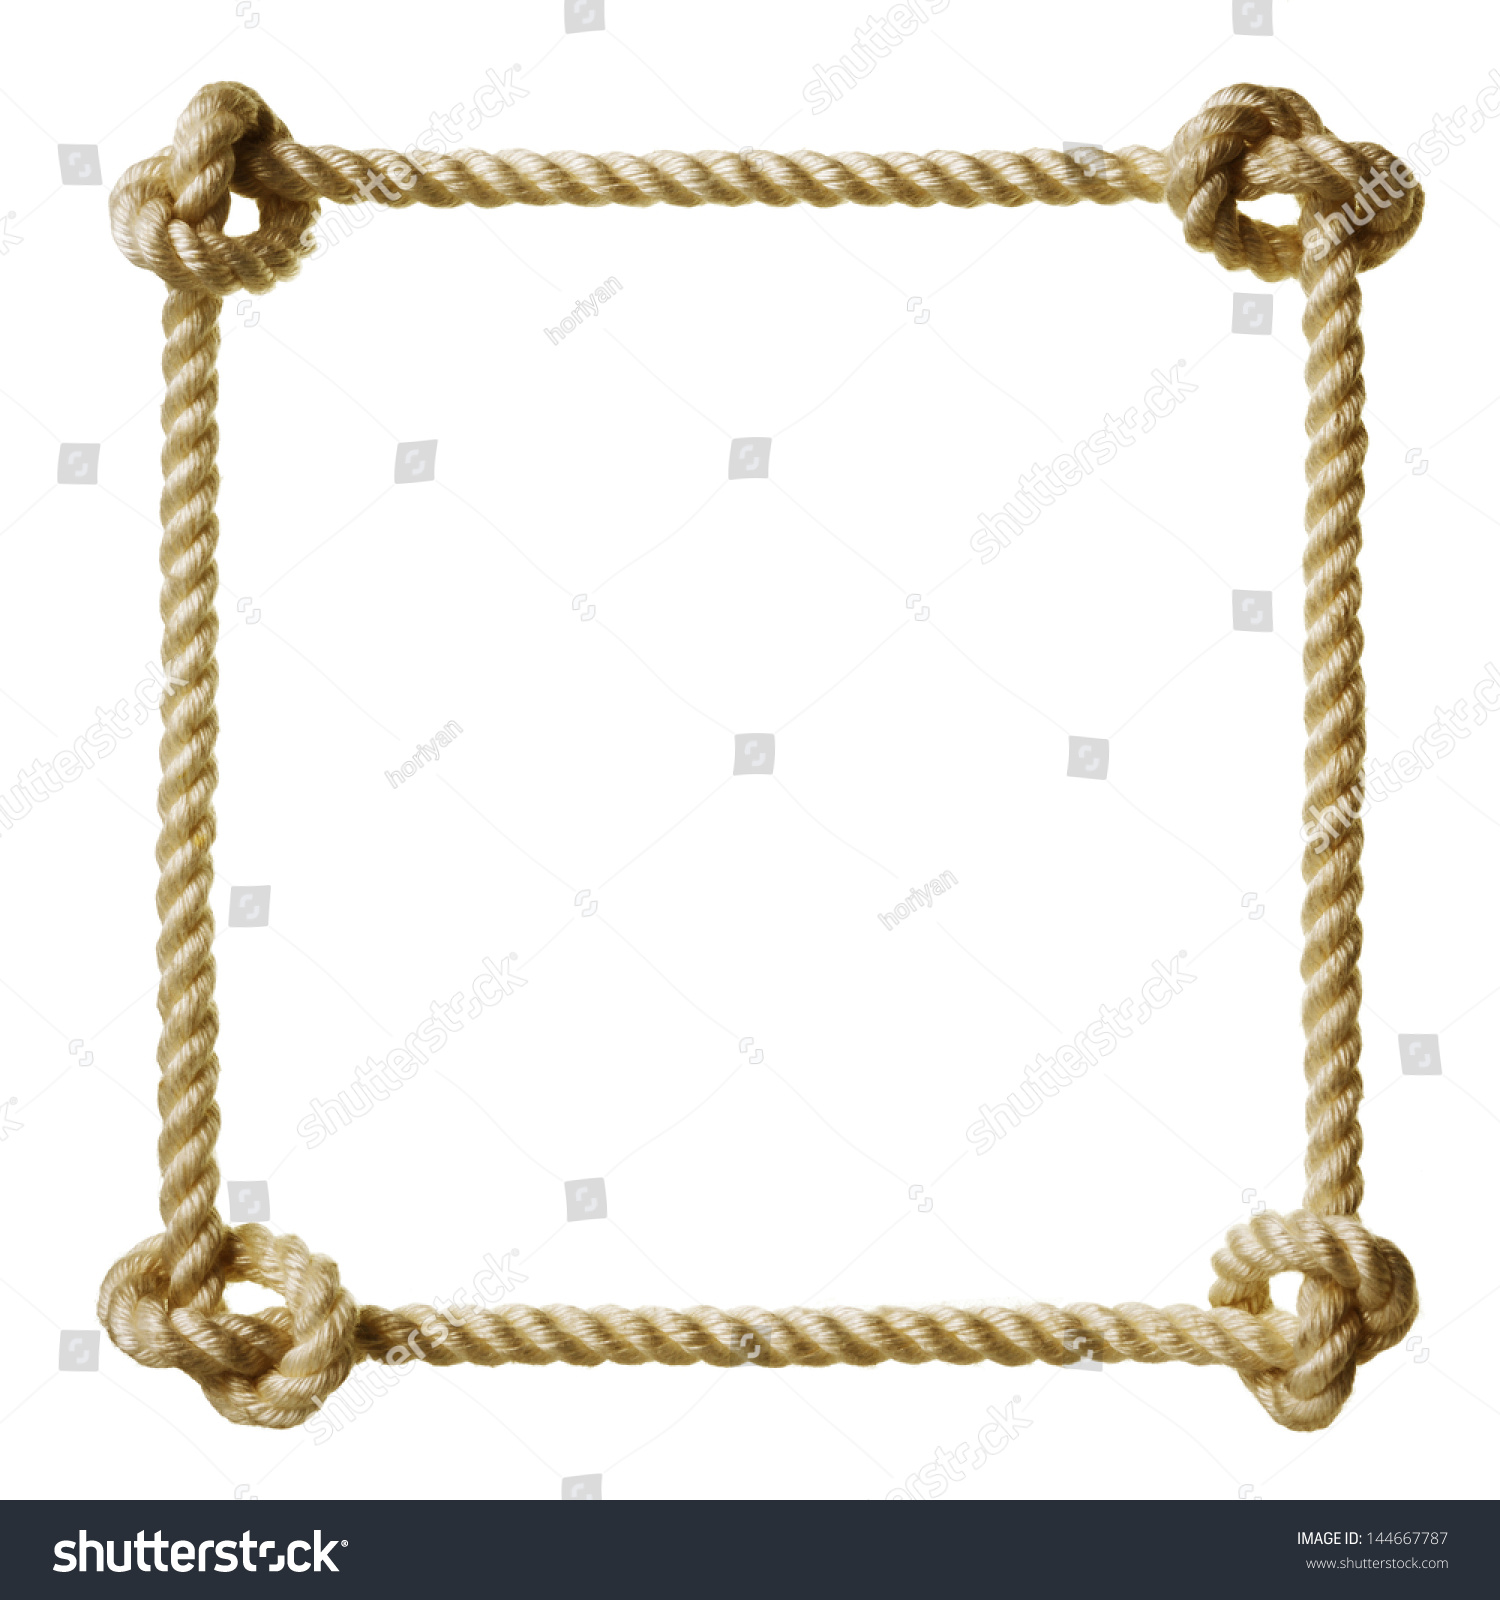 Beautiful Rope Picture Frame Ensign - Framed Art Ideas ...